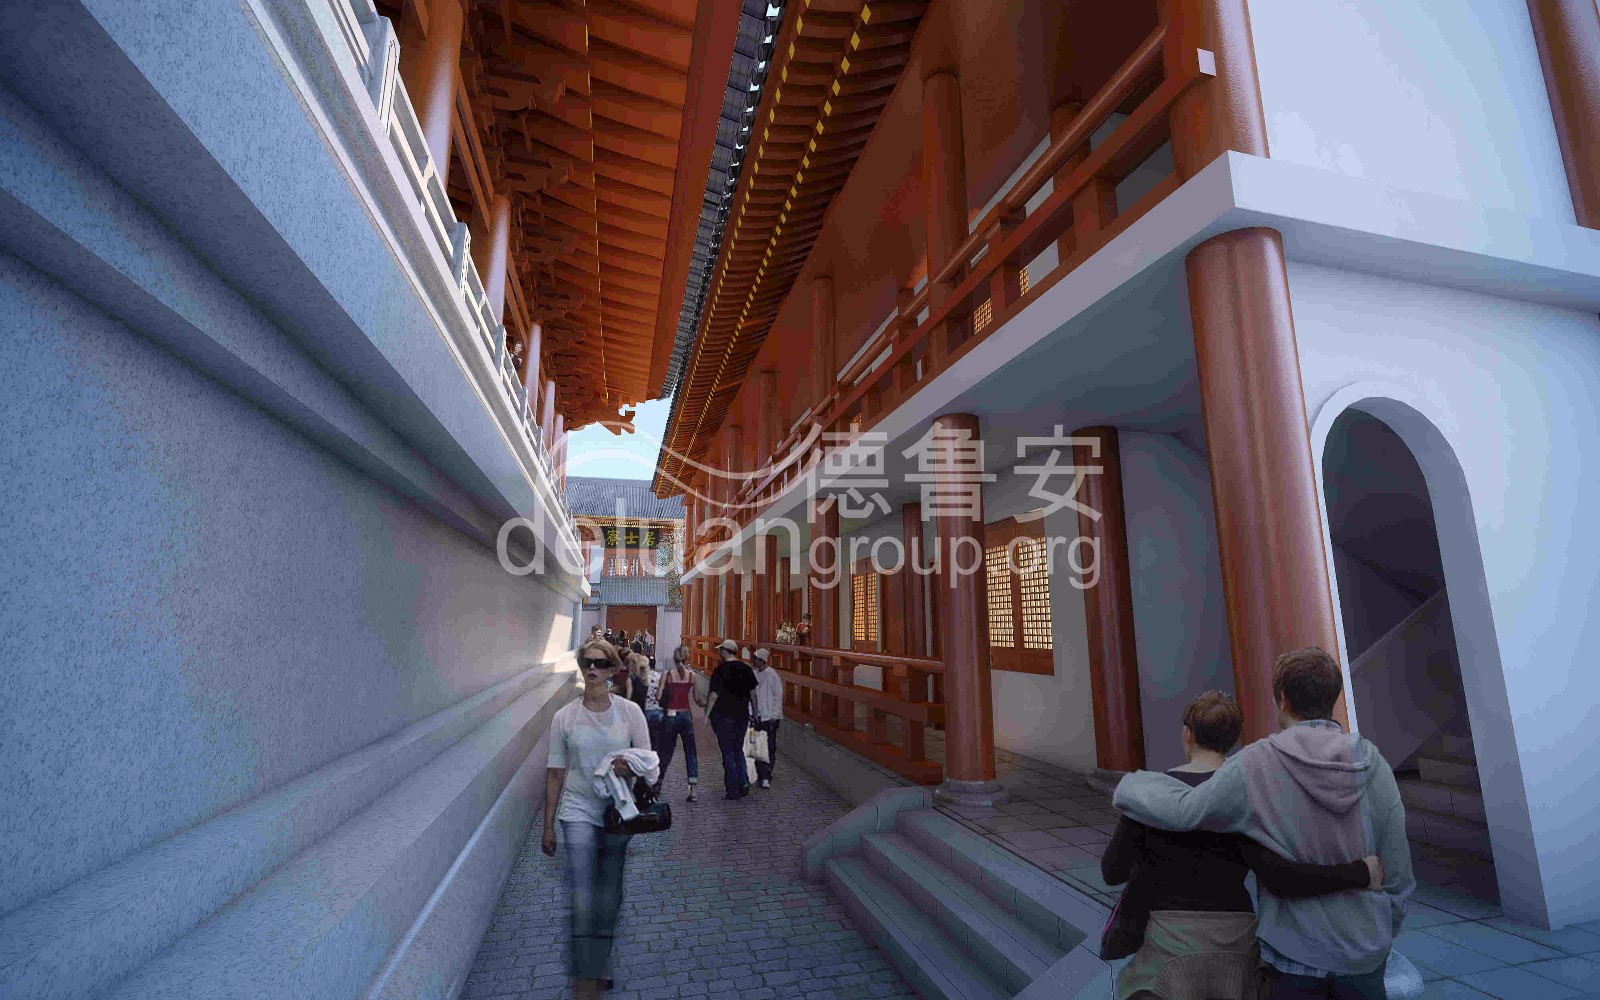 Planning and design of Baoqing temple in Xianghe(图24)